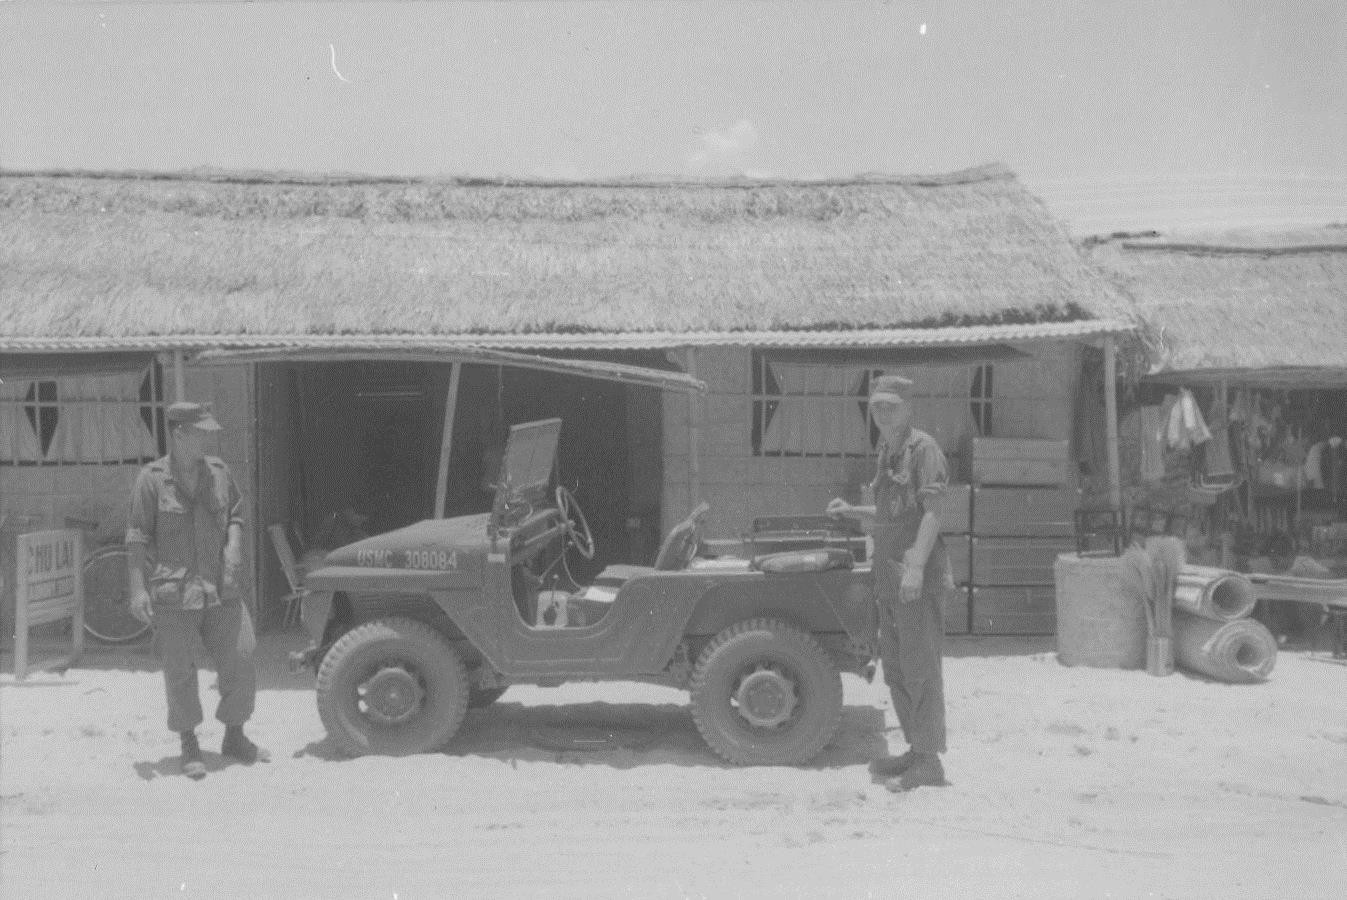 US Marine Sergeants Asato and Carlson with a Jeep in the village of An Ton, Vietnam, 1966